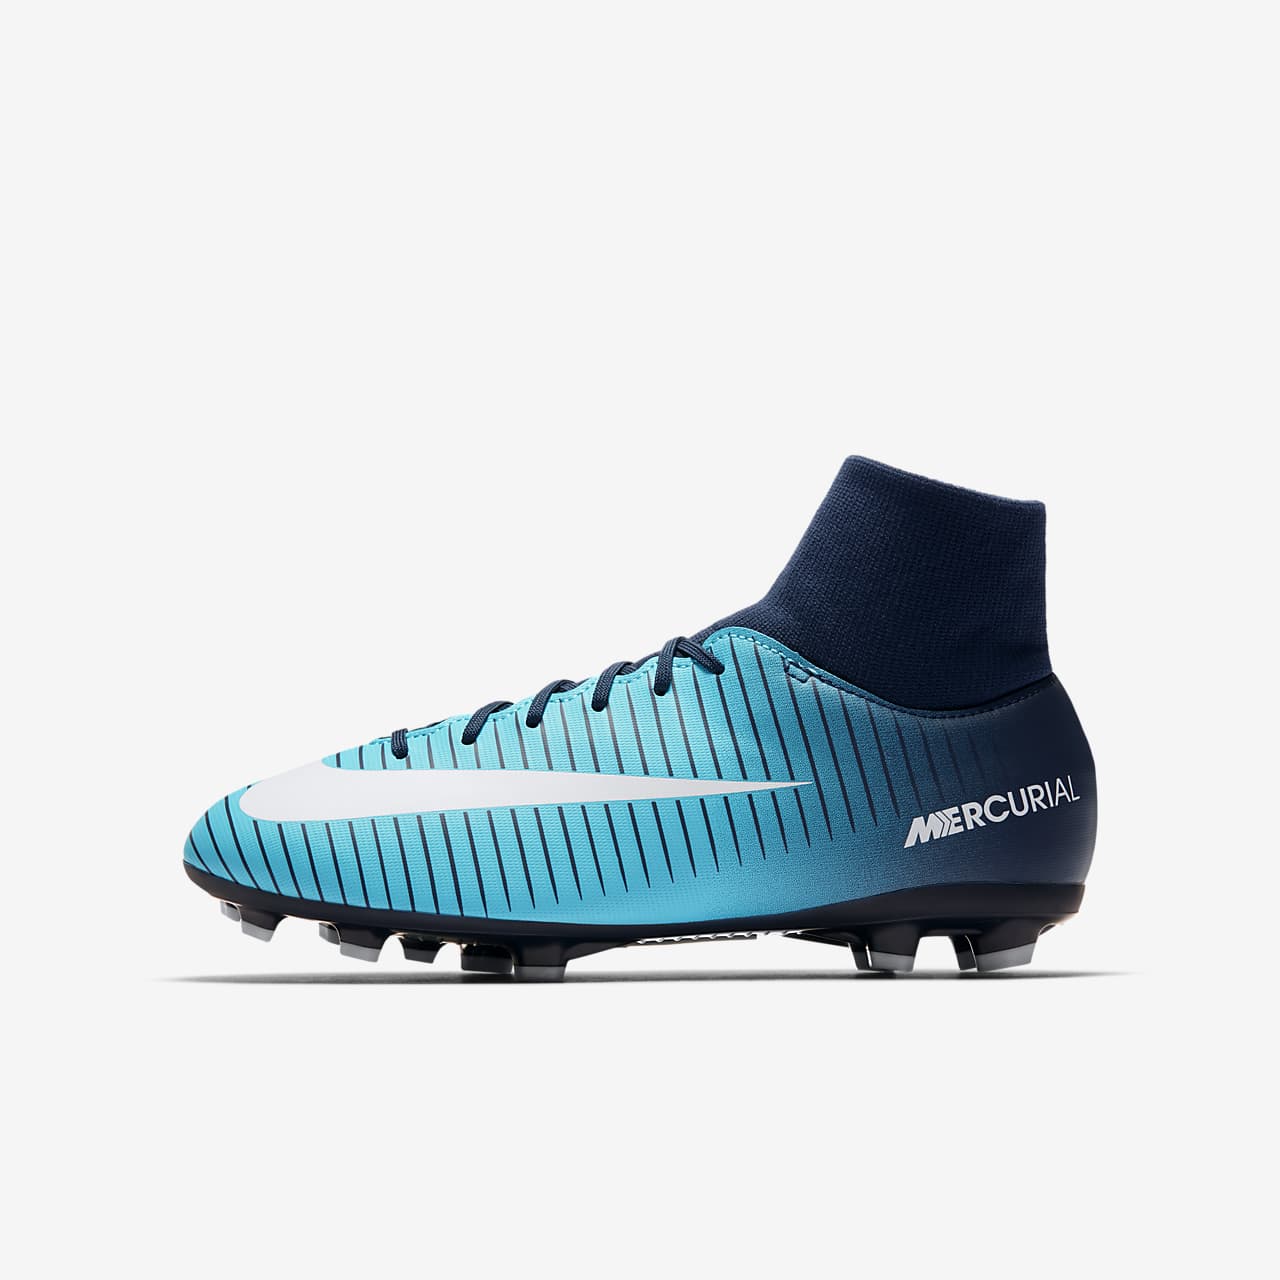 Jr. Mercurial Victory VI Dynamic Fit Little/Big Kids' Firm-Ground Soccer Cleat. Nike.com